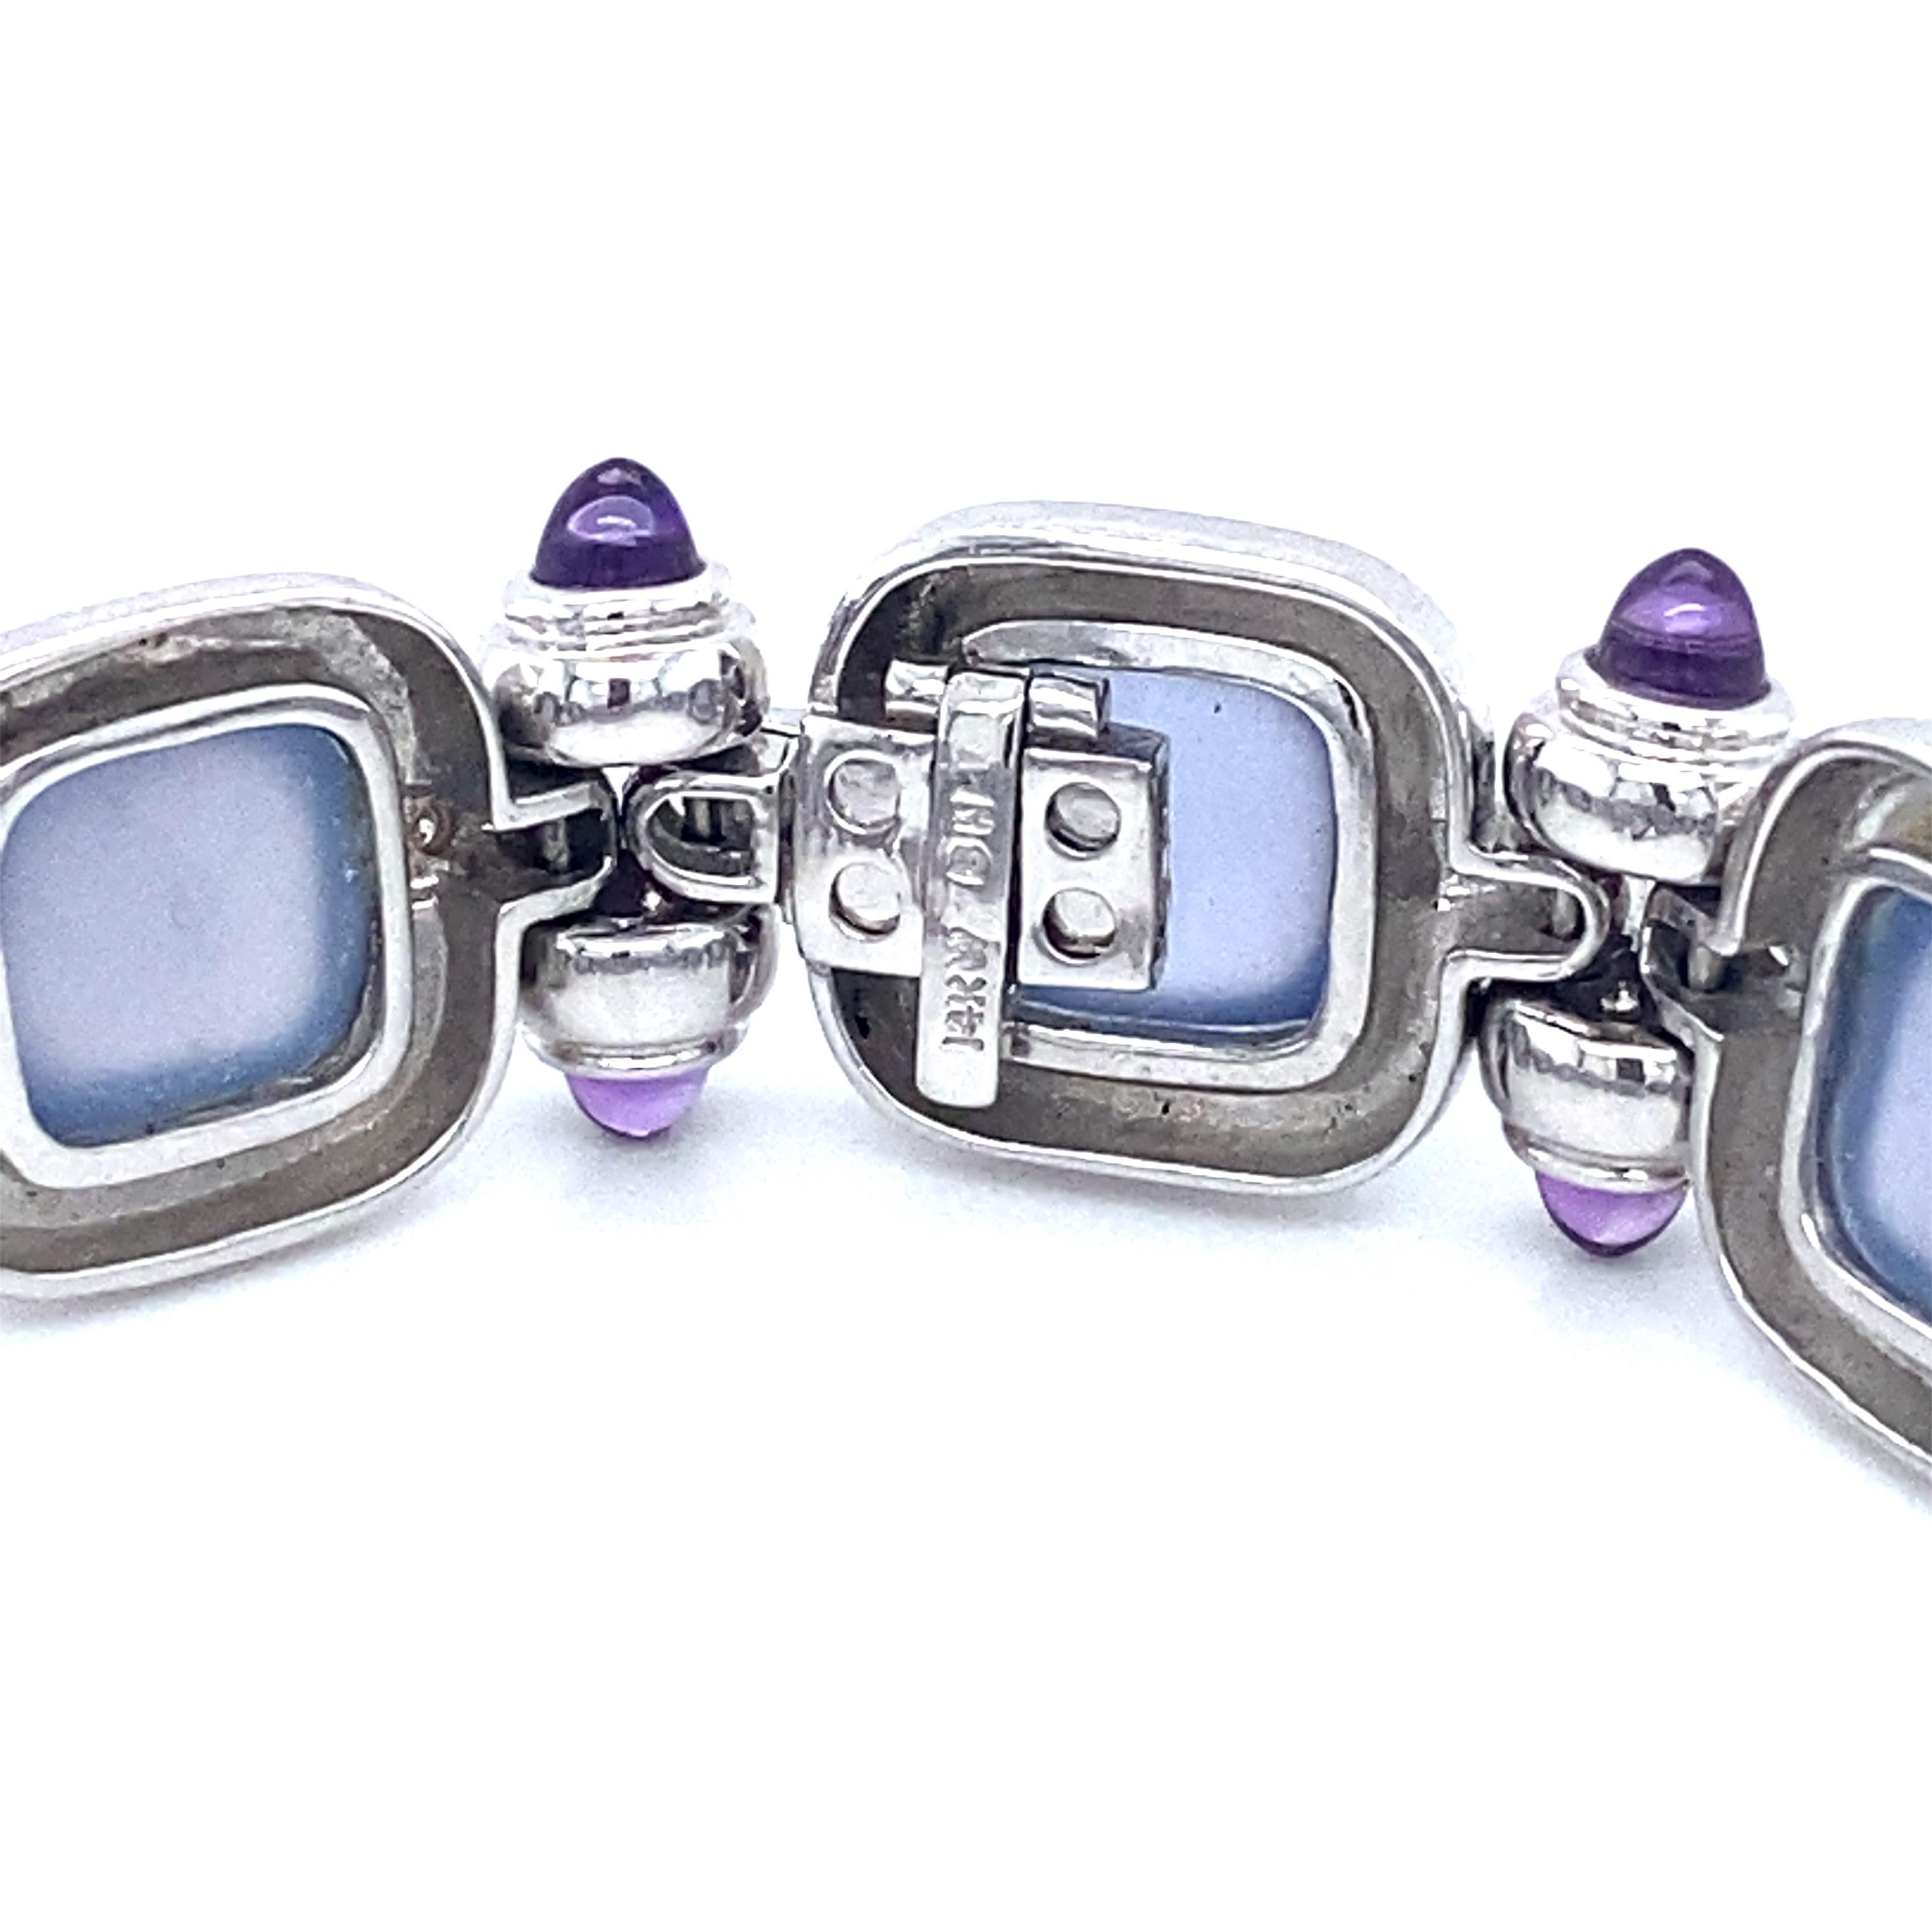 Cabochon Italian Chalcedony and Amethyst Bracelet with Diamonds in 14 Karat White Gold